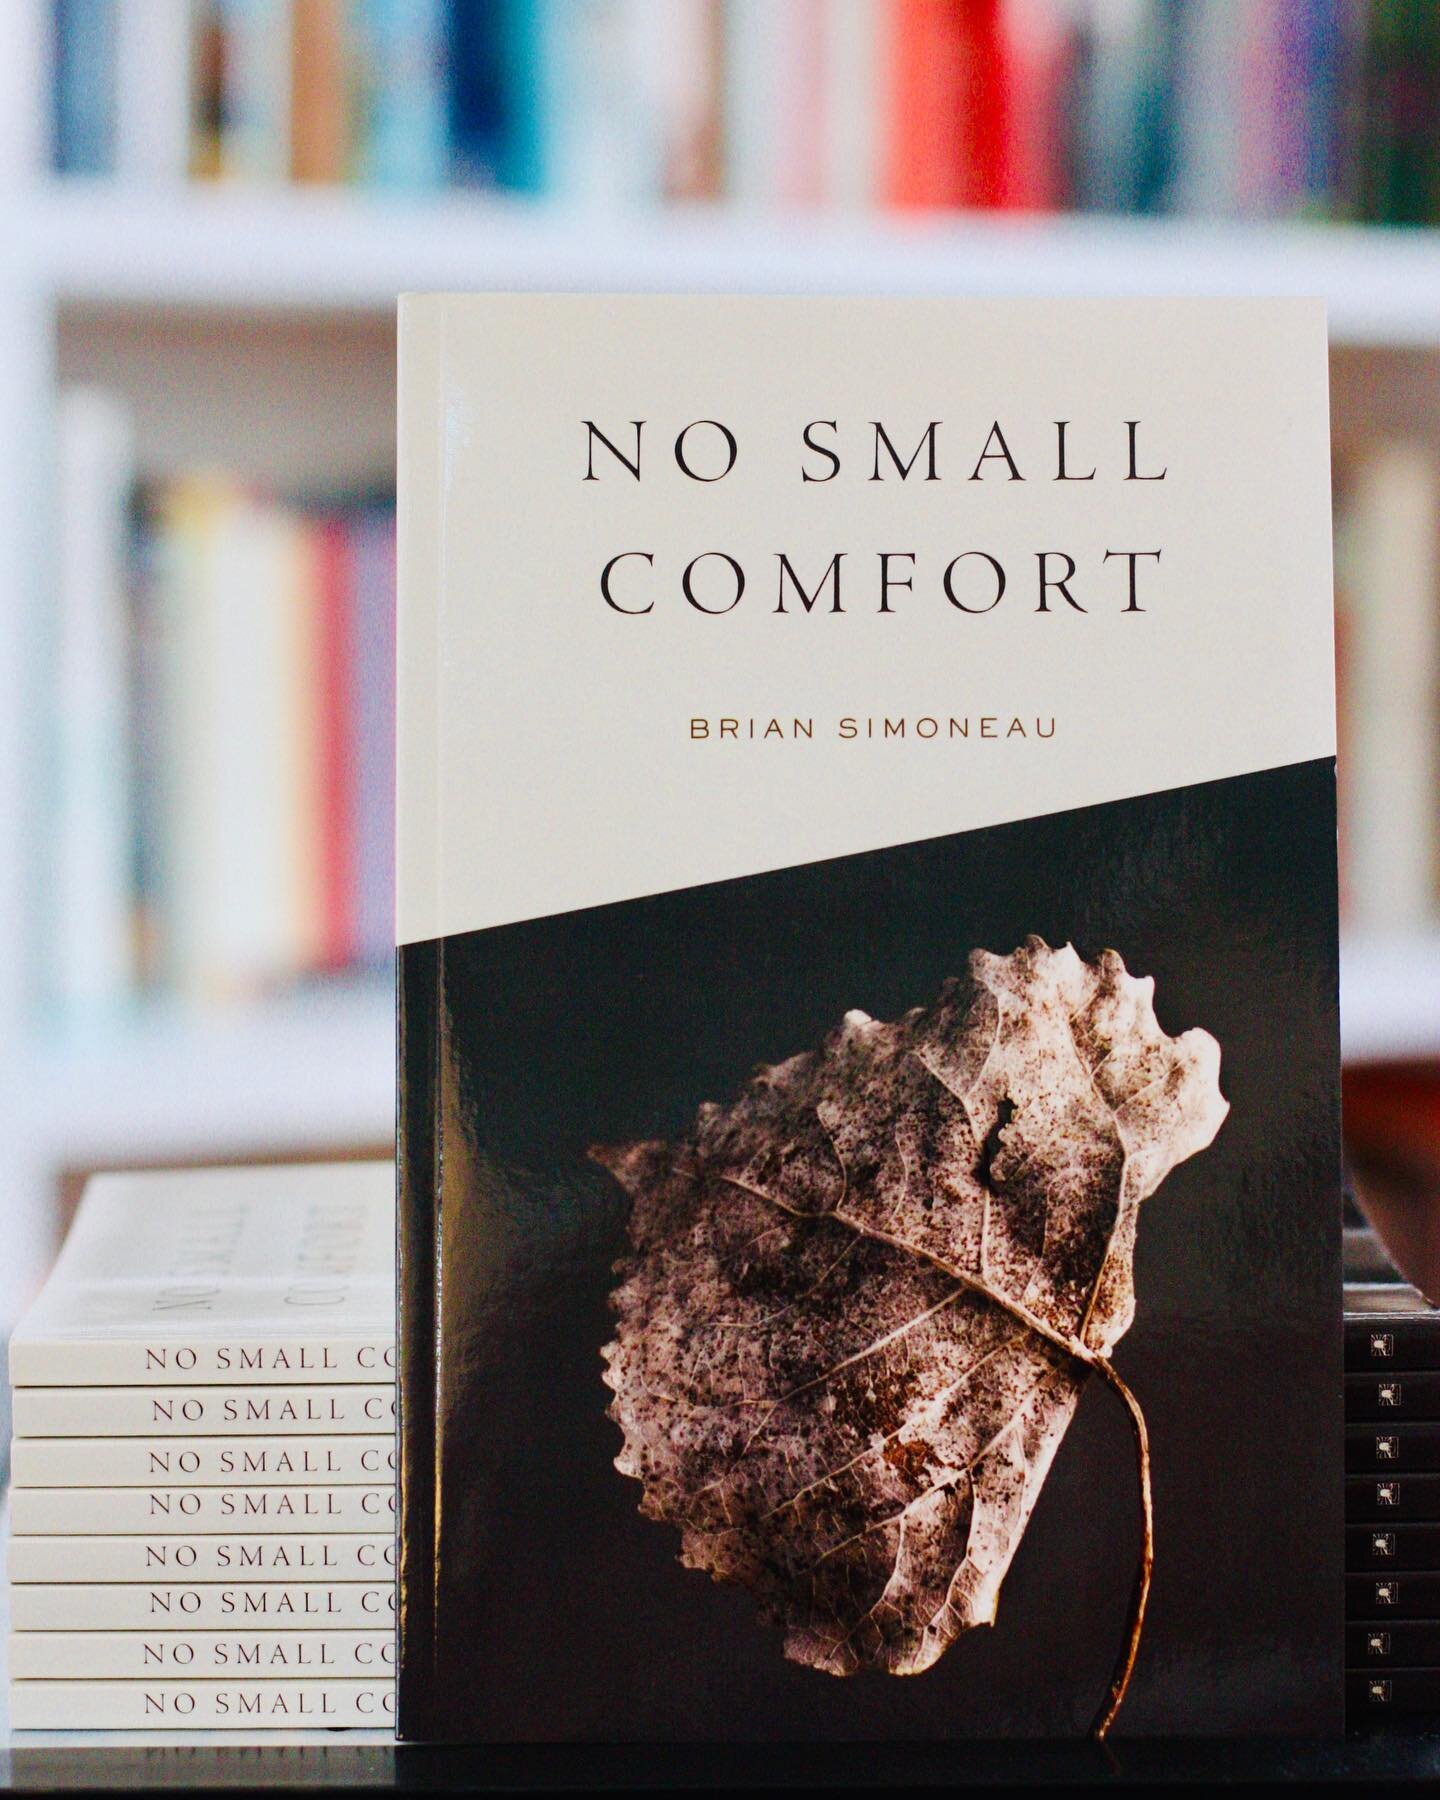 I forgot to celebrate over the weekend, but it&rsquo;s now been two years since my book No Small Comfort came out. Endless gratitude to anyone &amp; everyone who&rsquo;s spent some time with it.